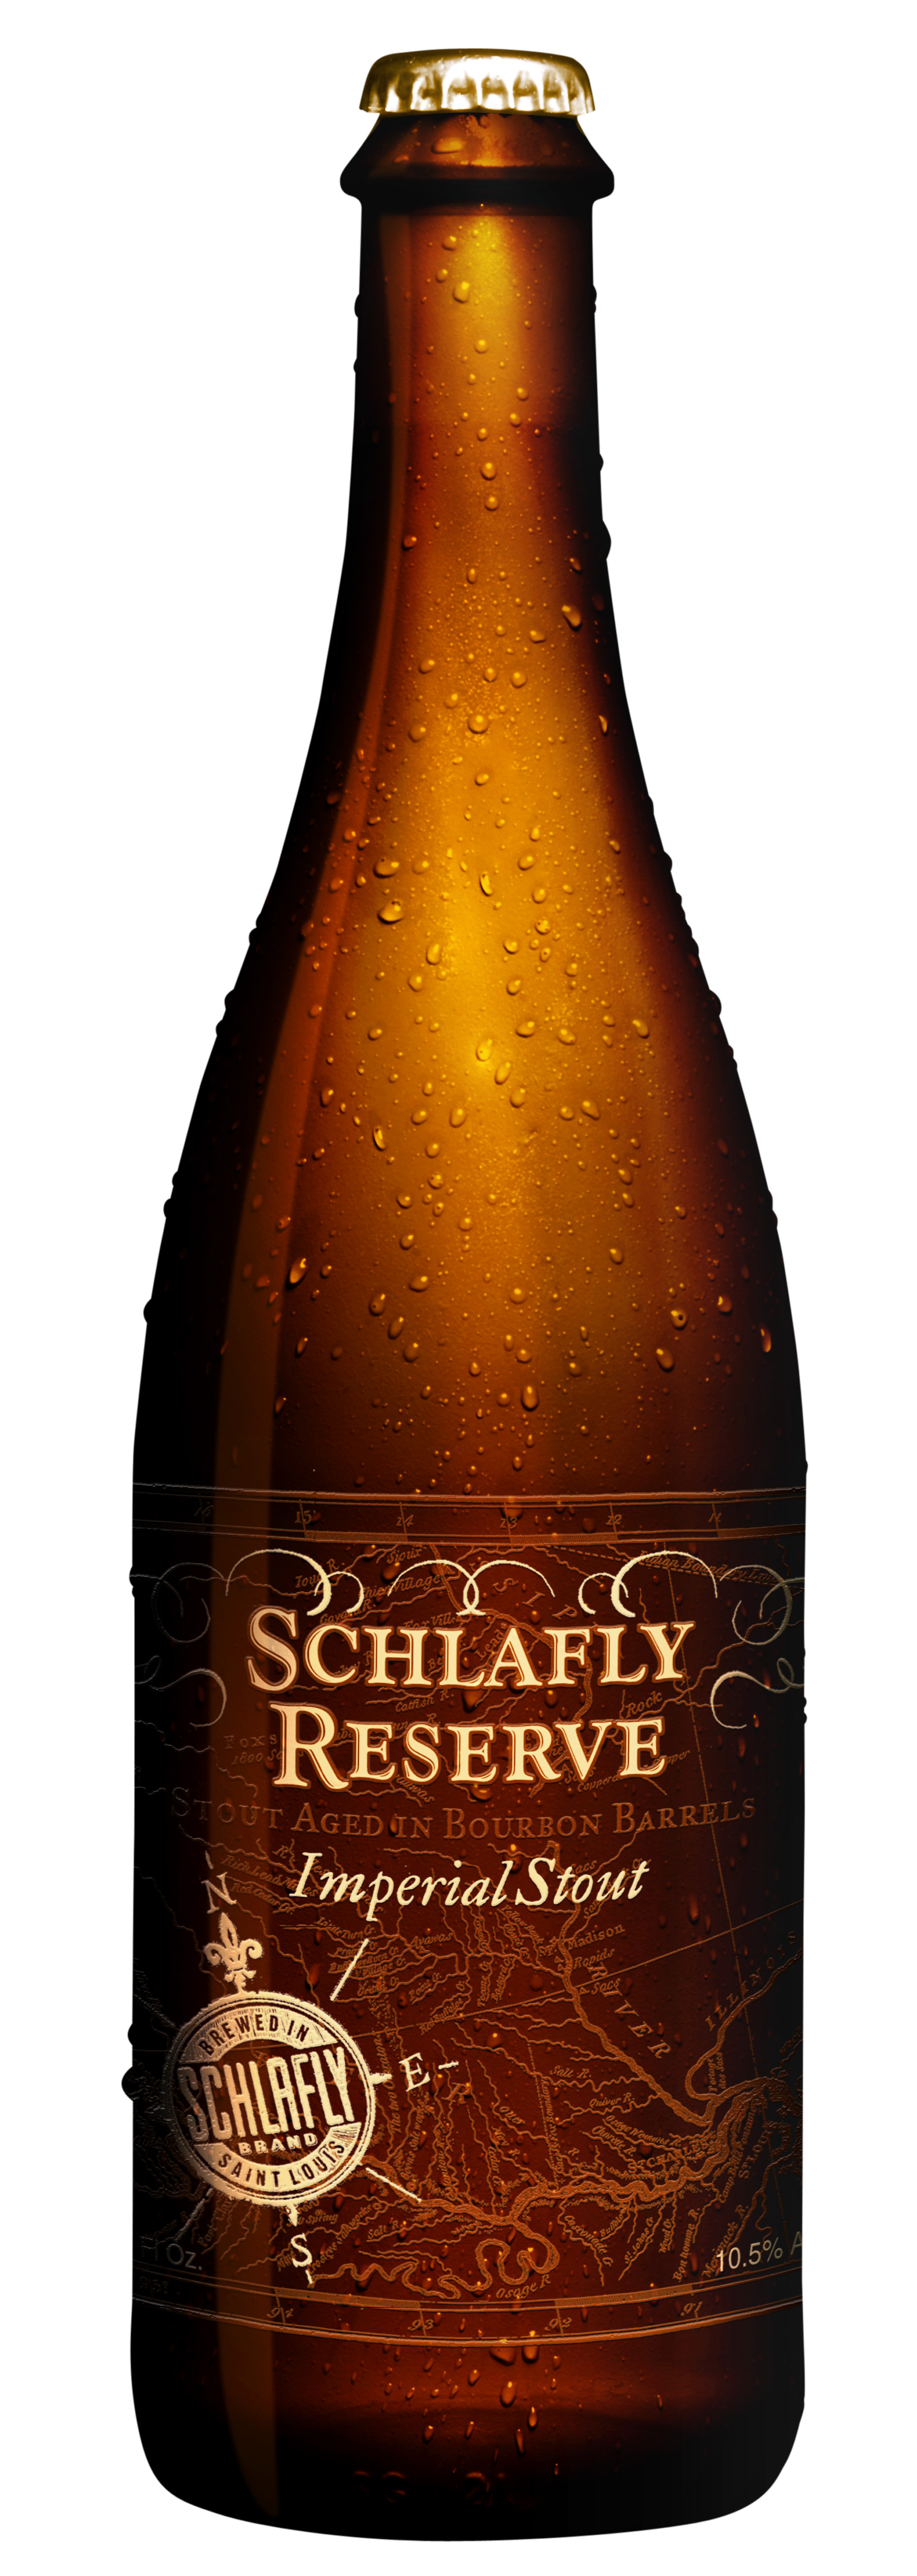 Schlafly Reserve Imperial Stout